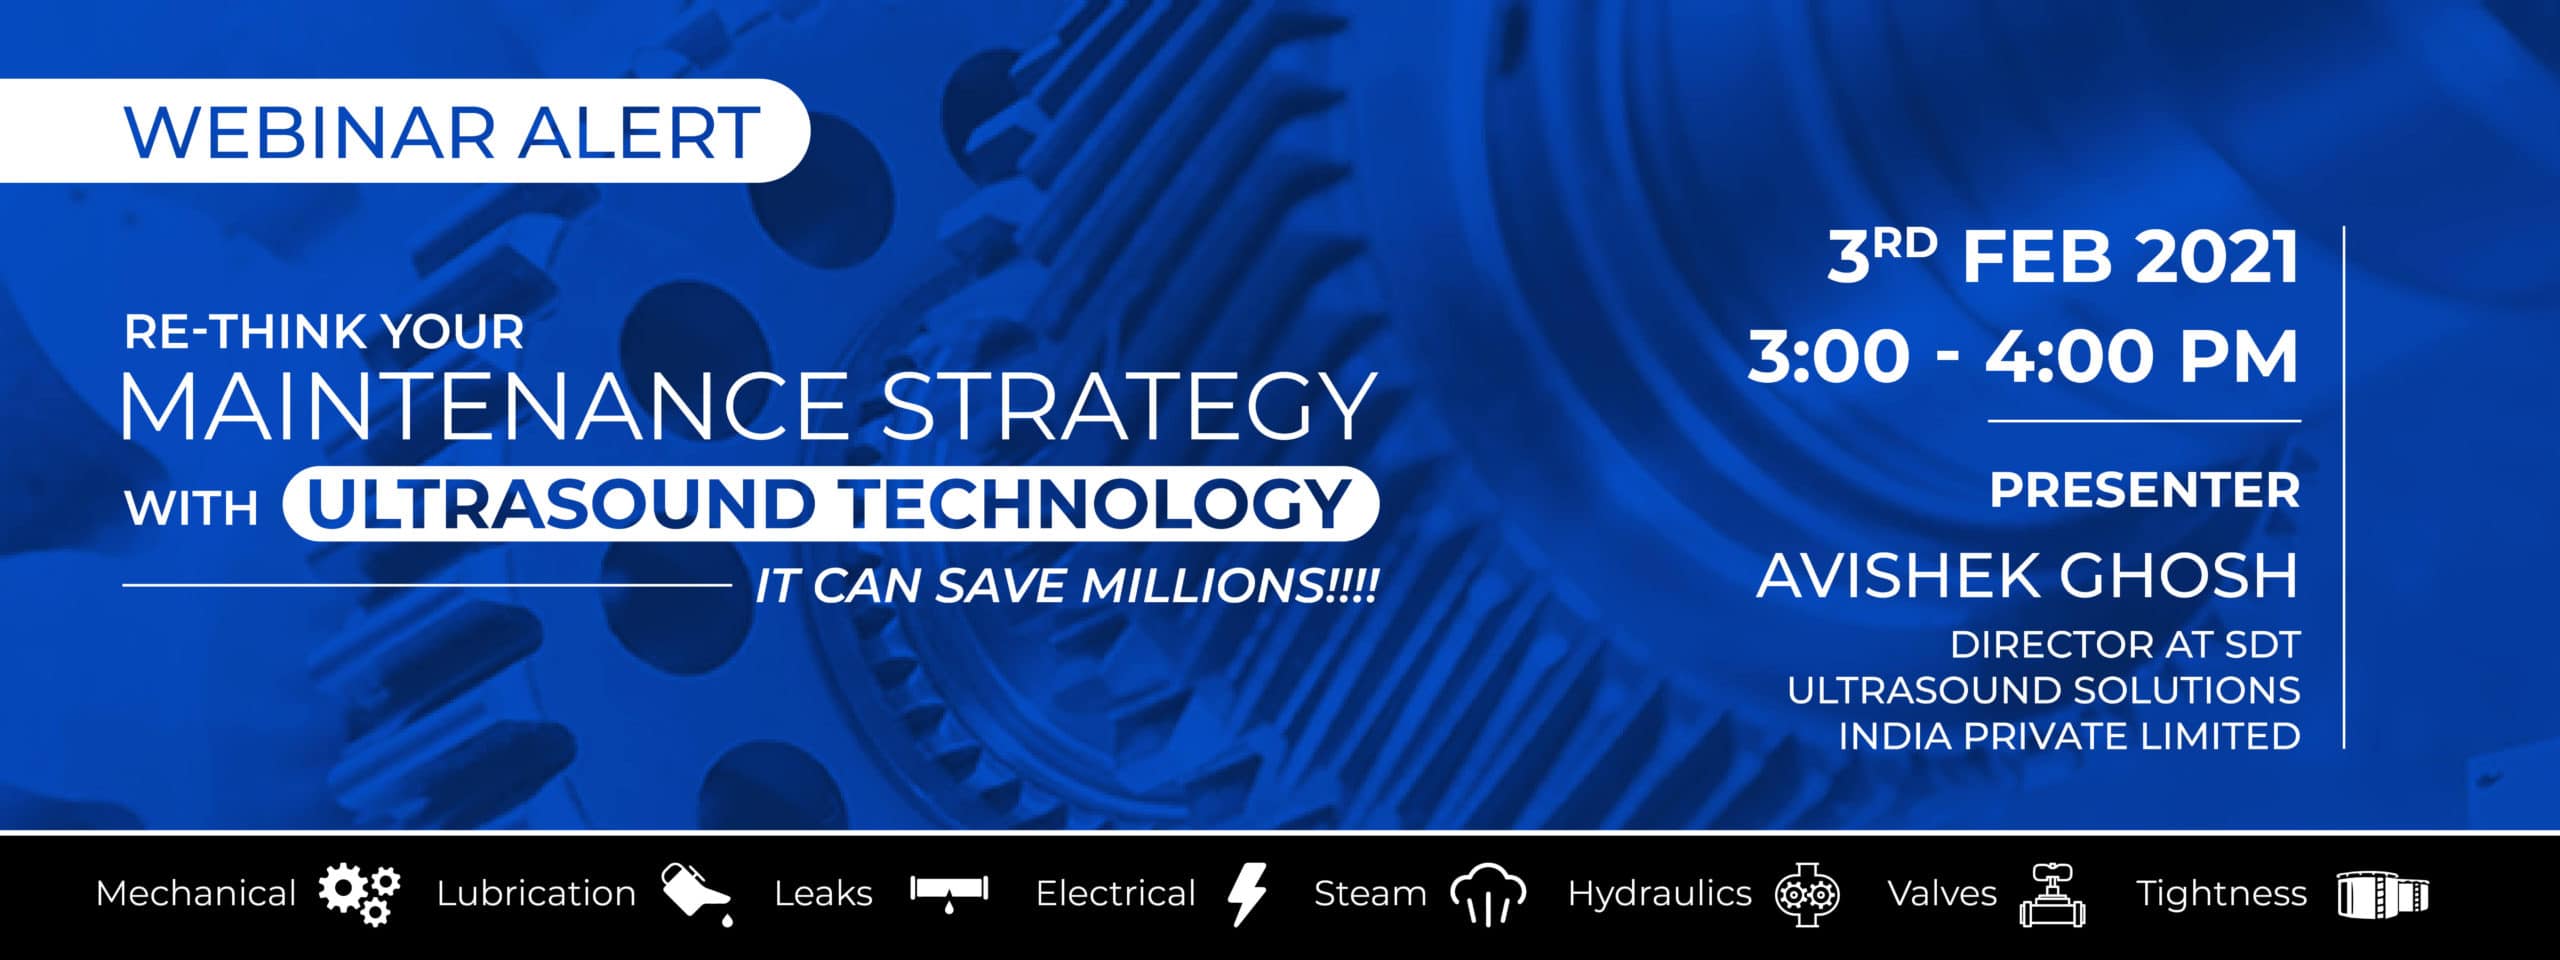 RE-Think Maintenance strategy with Ultrasound Technology - It can save millions!!!!